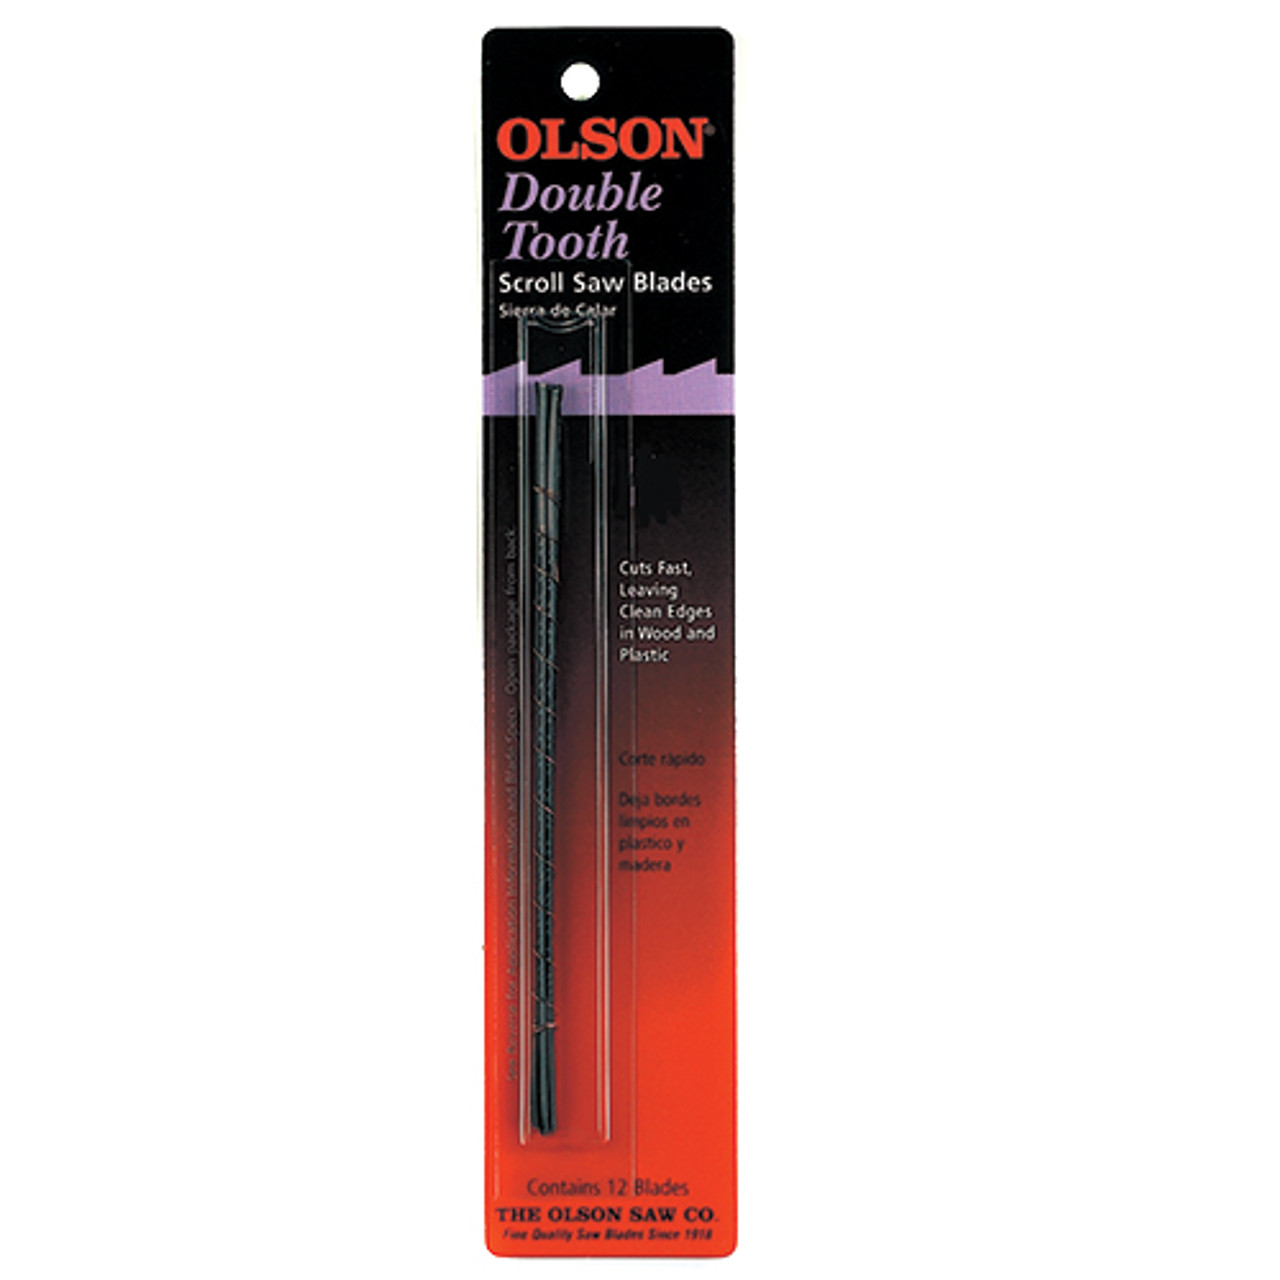 Olson Double Tooth Scroll #43400 12pk